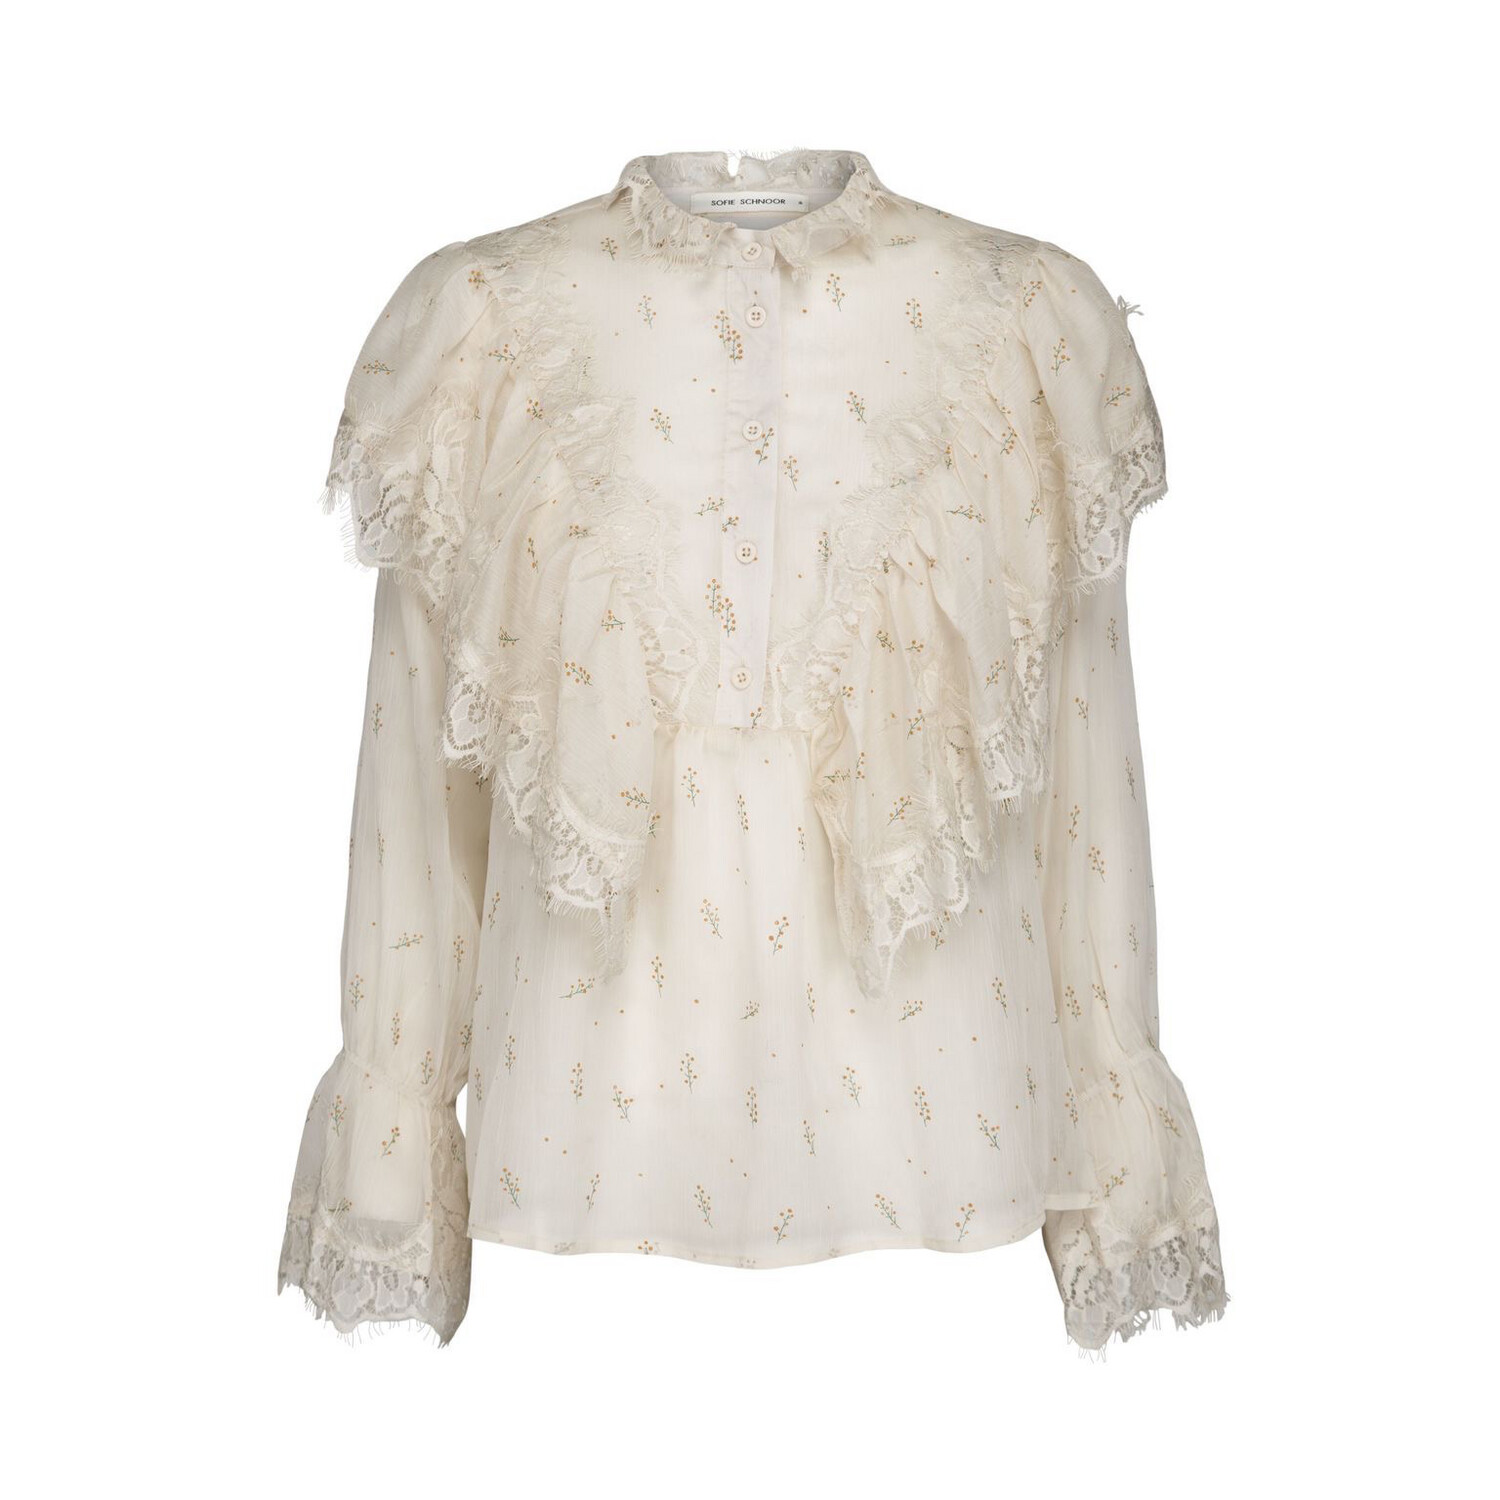 Sofie Schnoor Frill Lace Trim Blouse